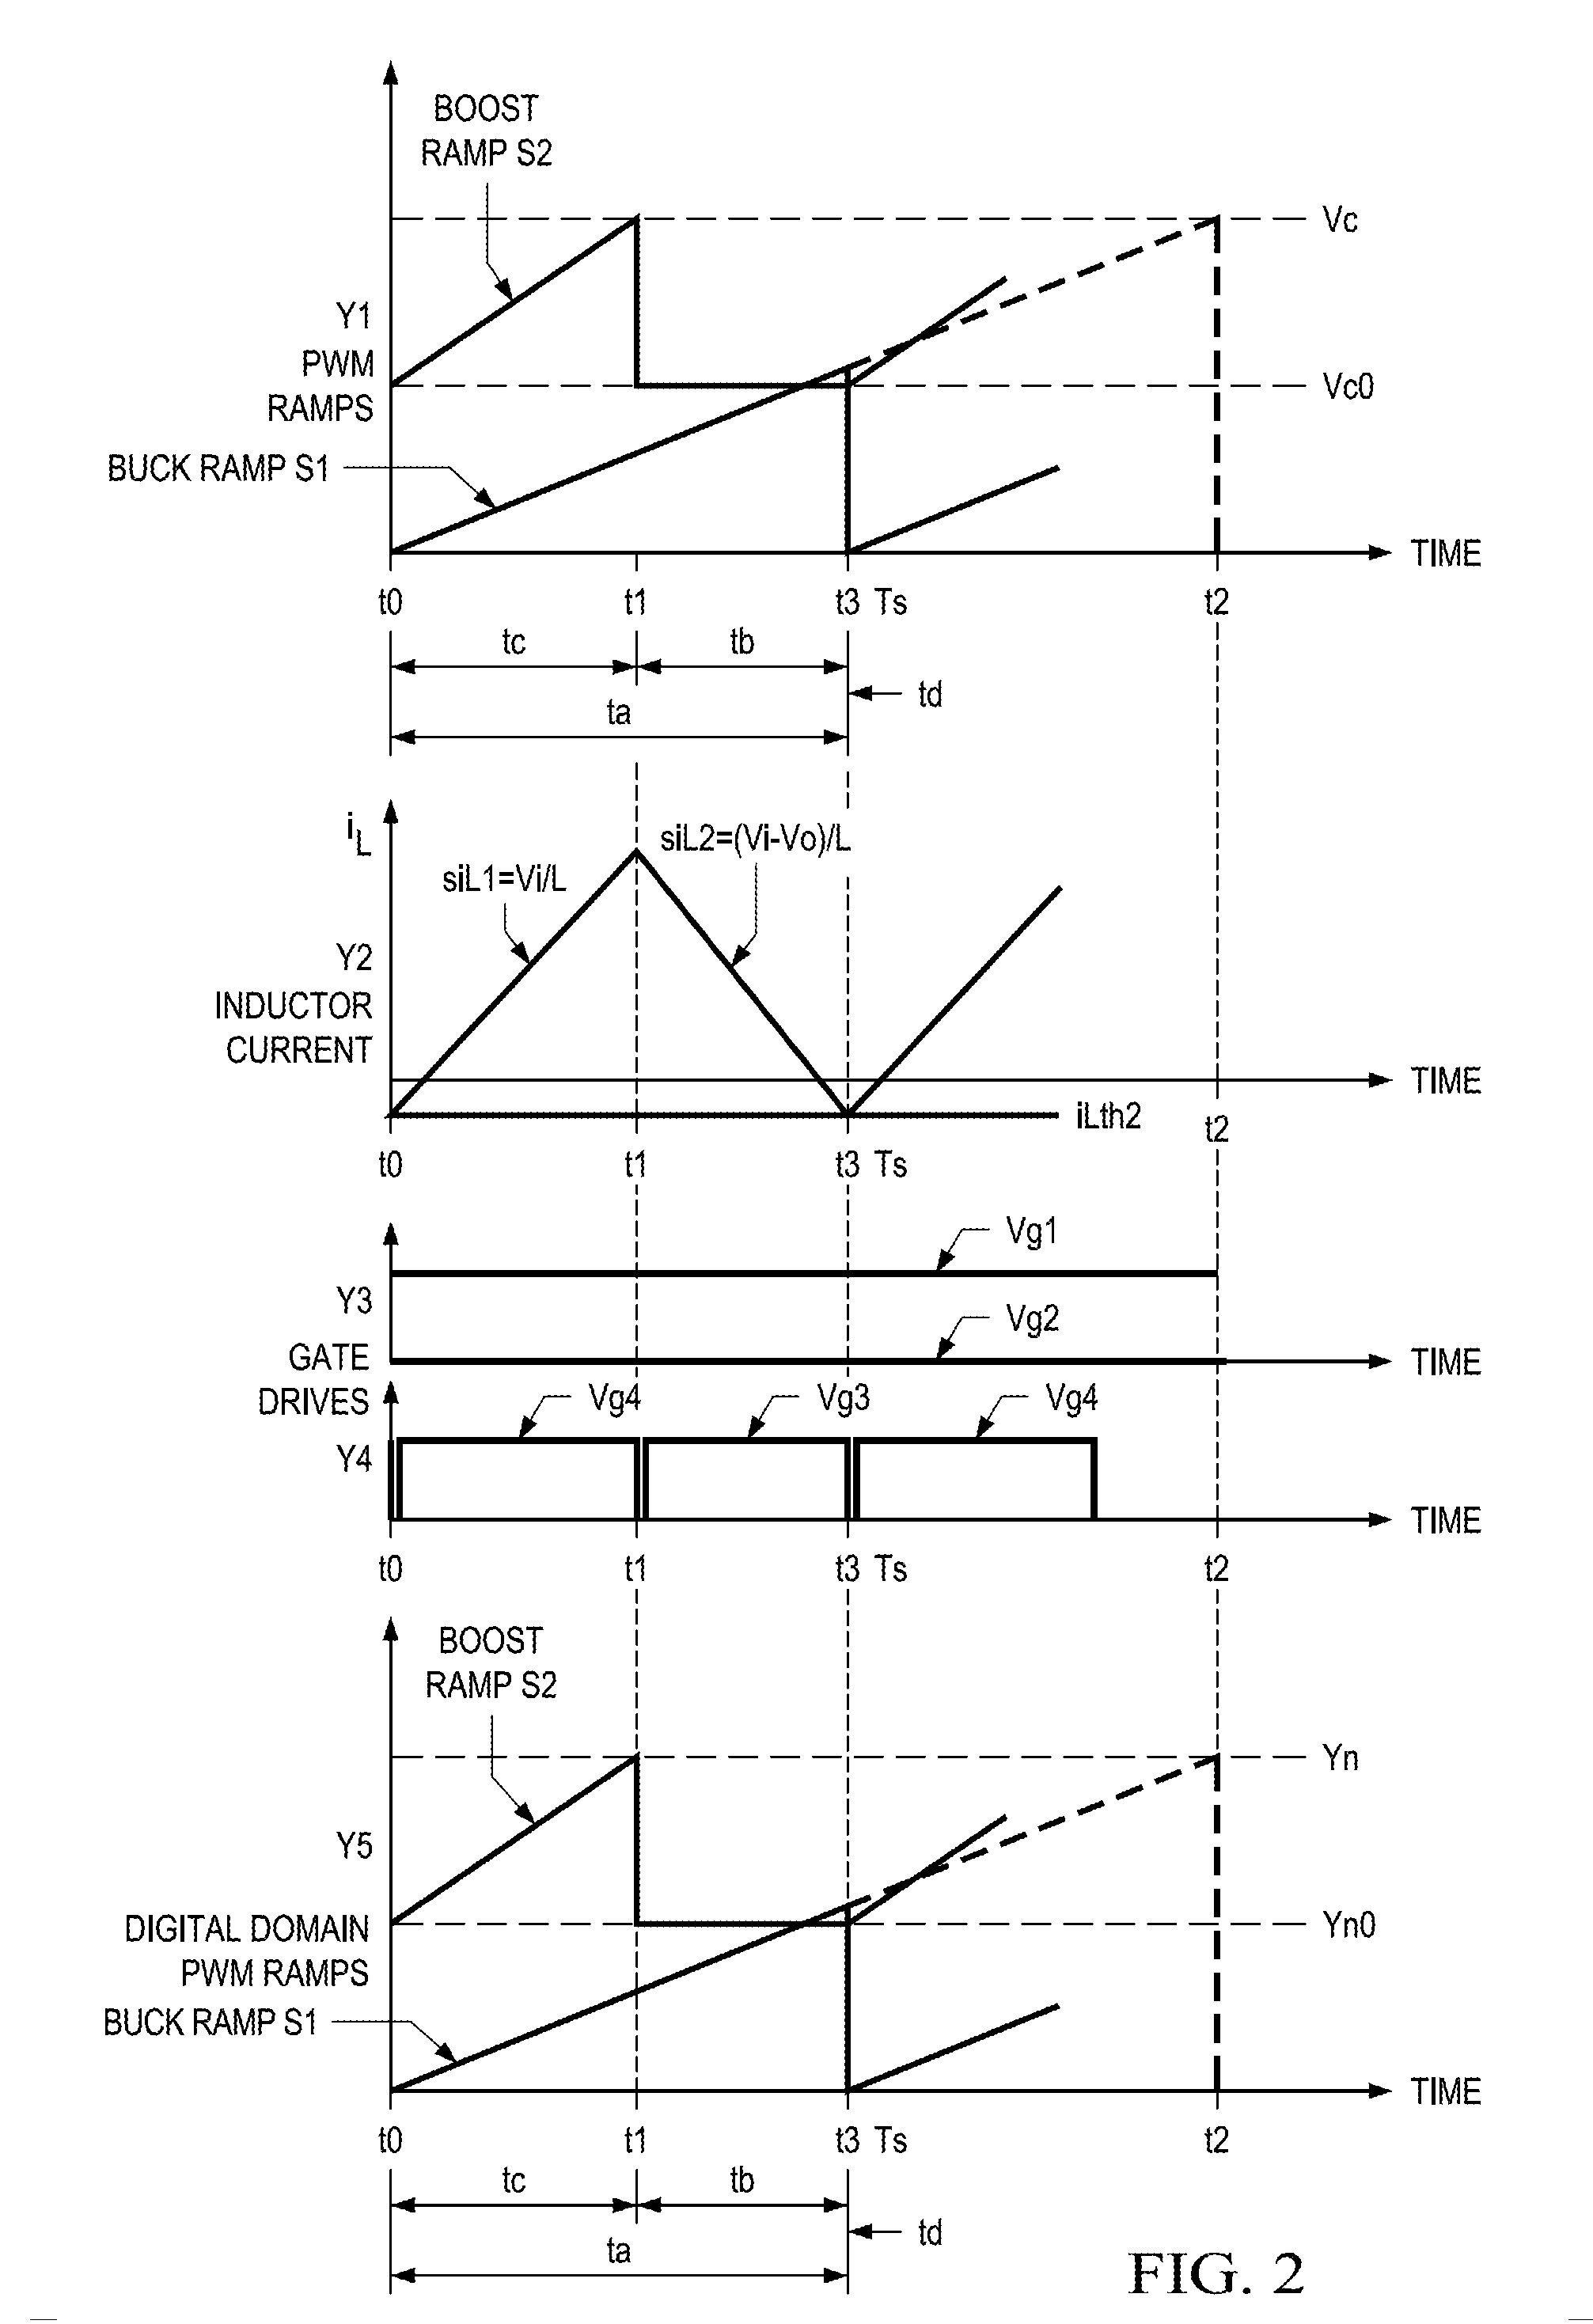 Control Method for Buck-Boost Power Converters